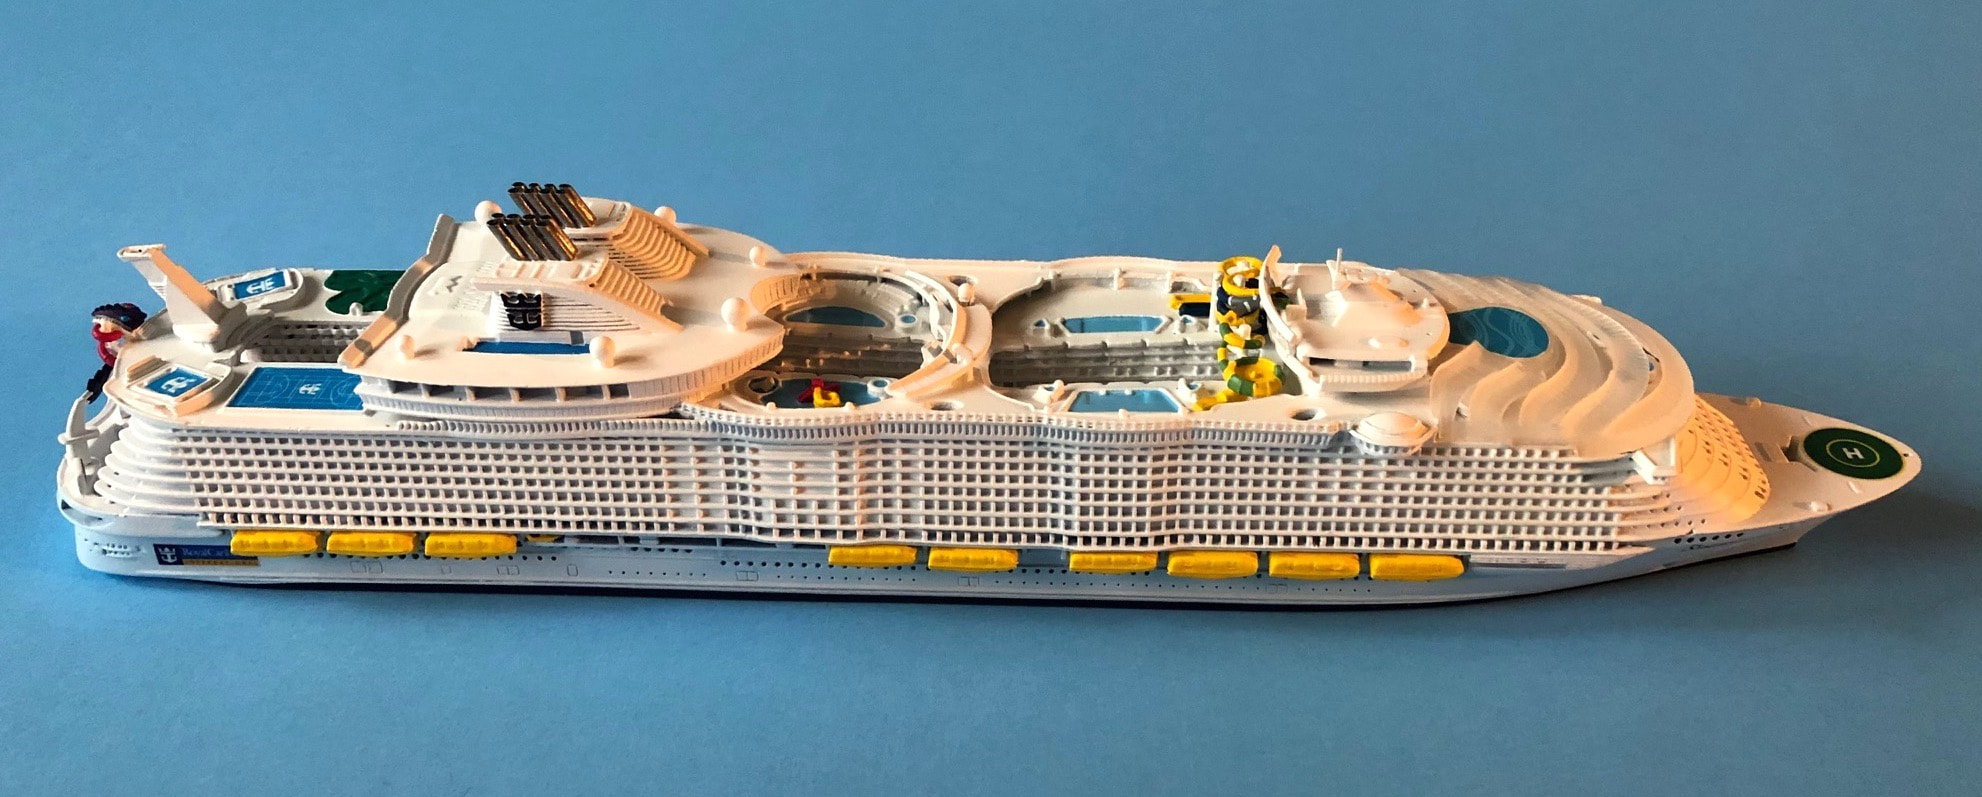 Symphony of the Seas cruise ship model in 1:1250 scale